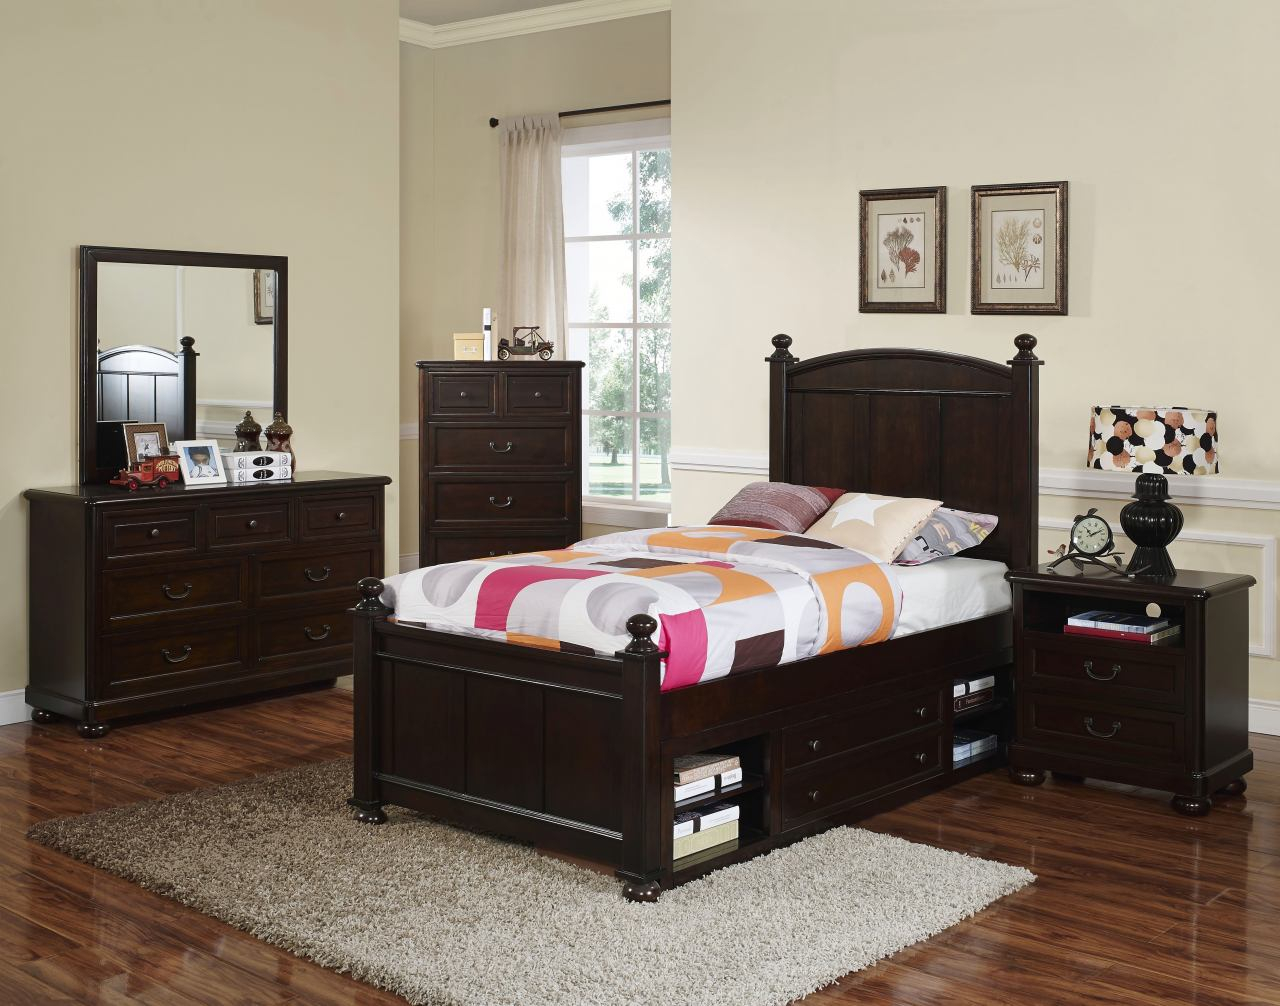 New Classic Canyon Ridge 4 Pc Panel Bedroom Set W Storage In Chestnut Closeout in measurements 1280 X 1006